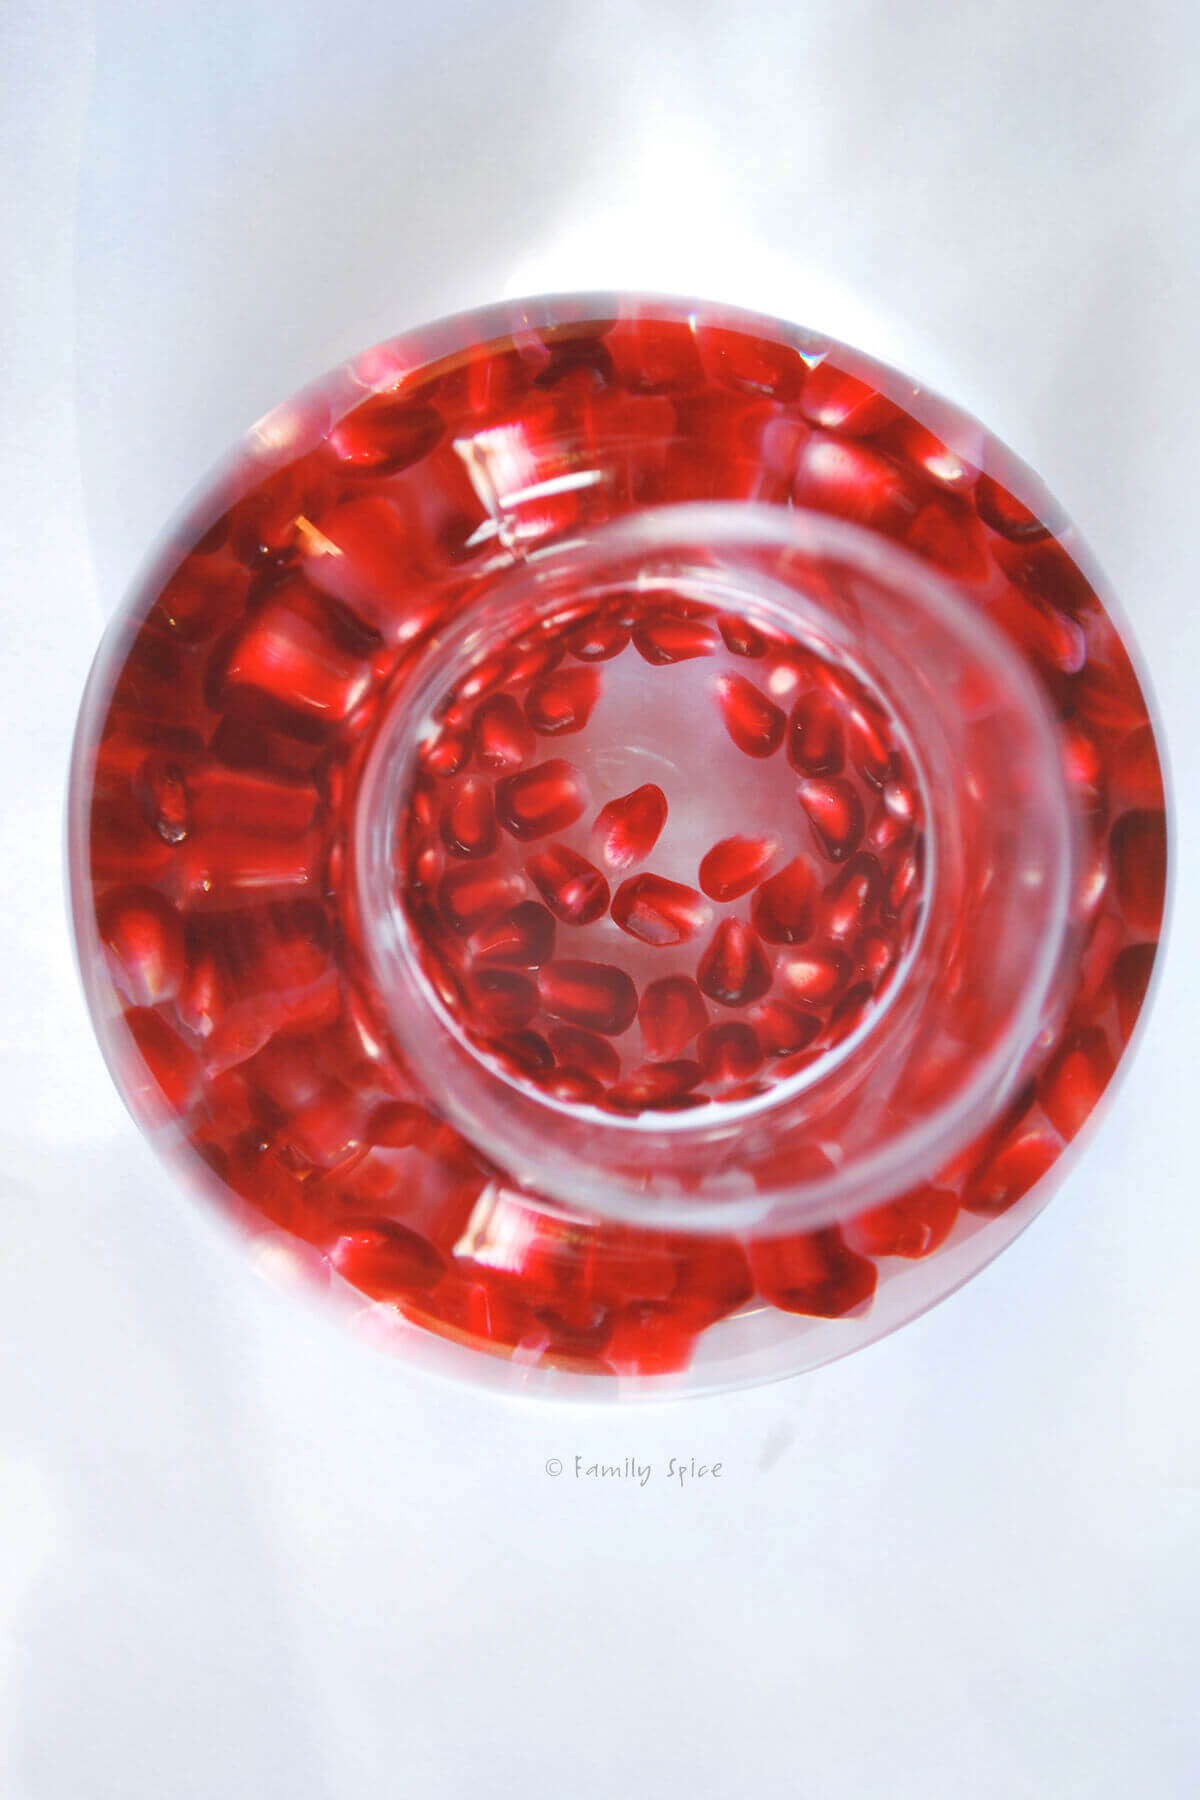 Top view of pomegranate arils in a bottle of vodka